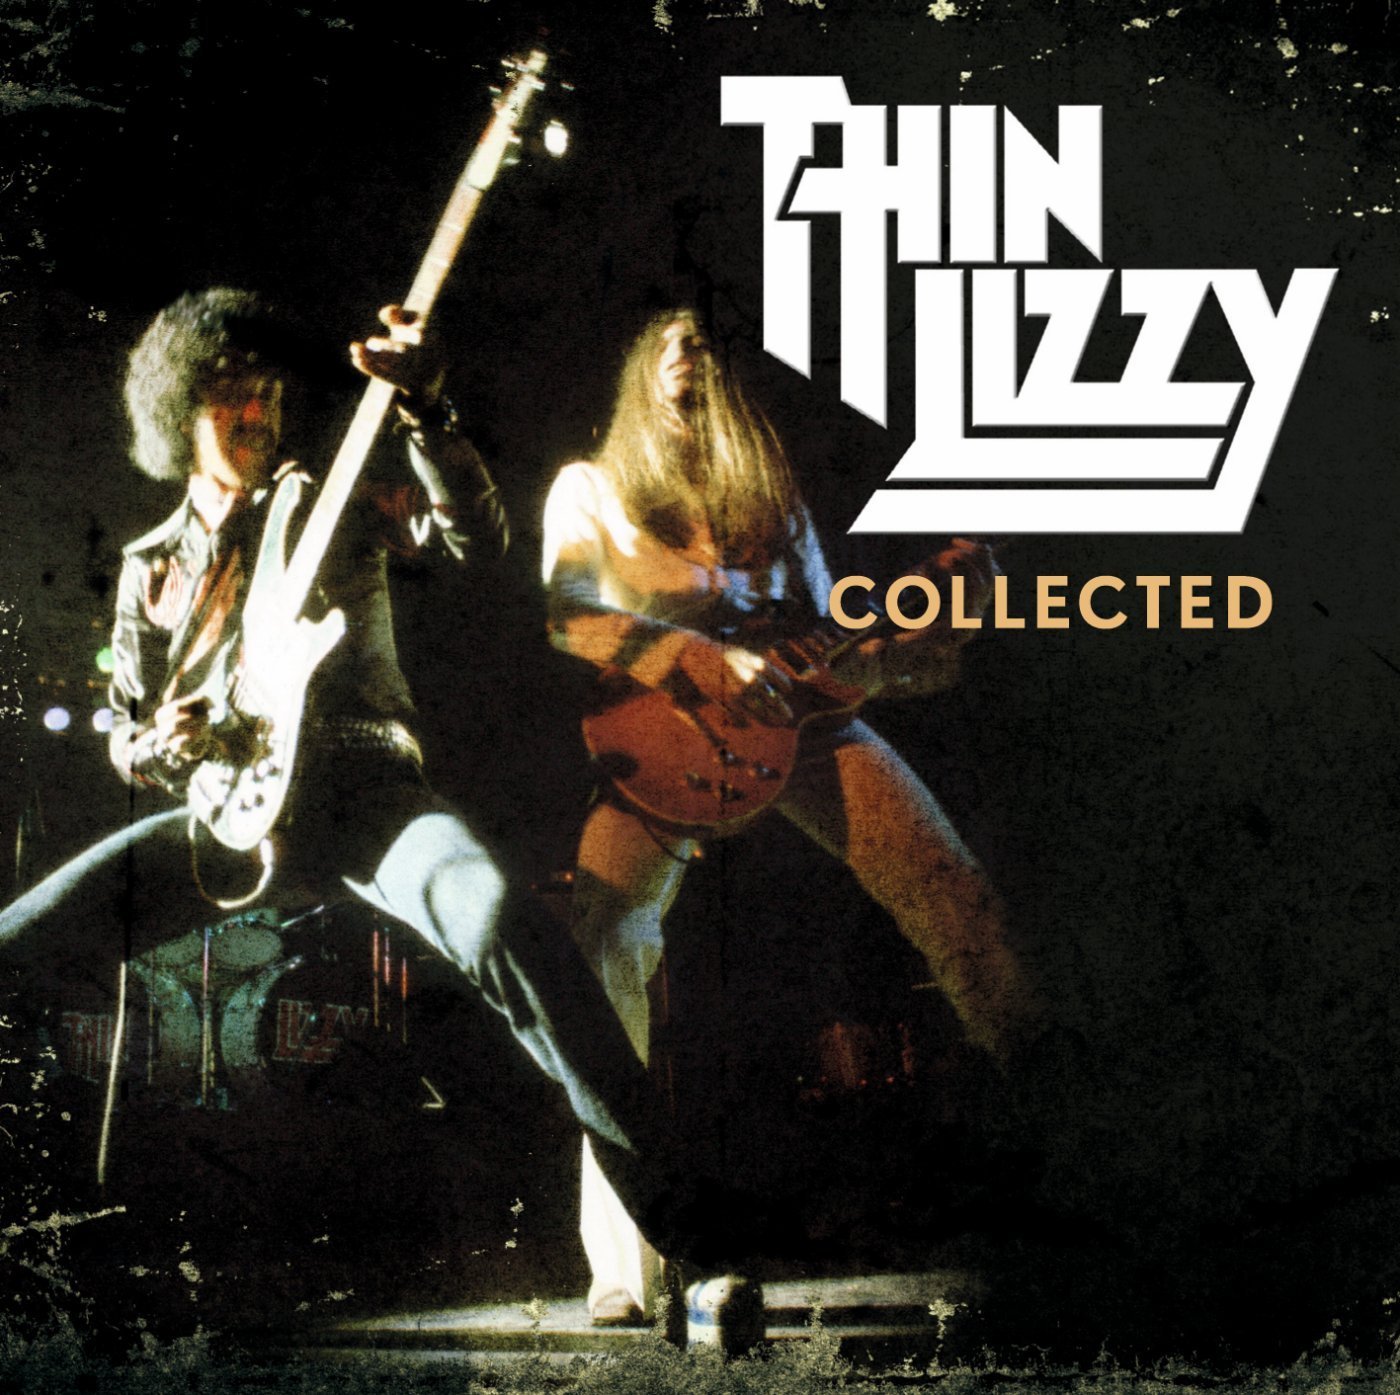 thin lizzy albums ranked